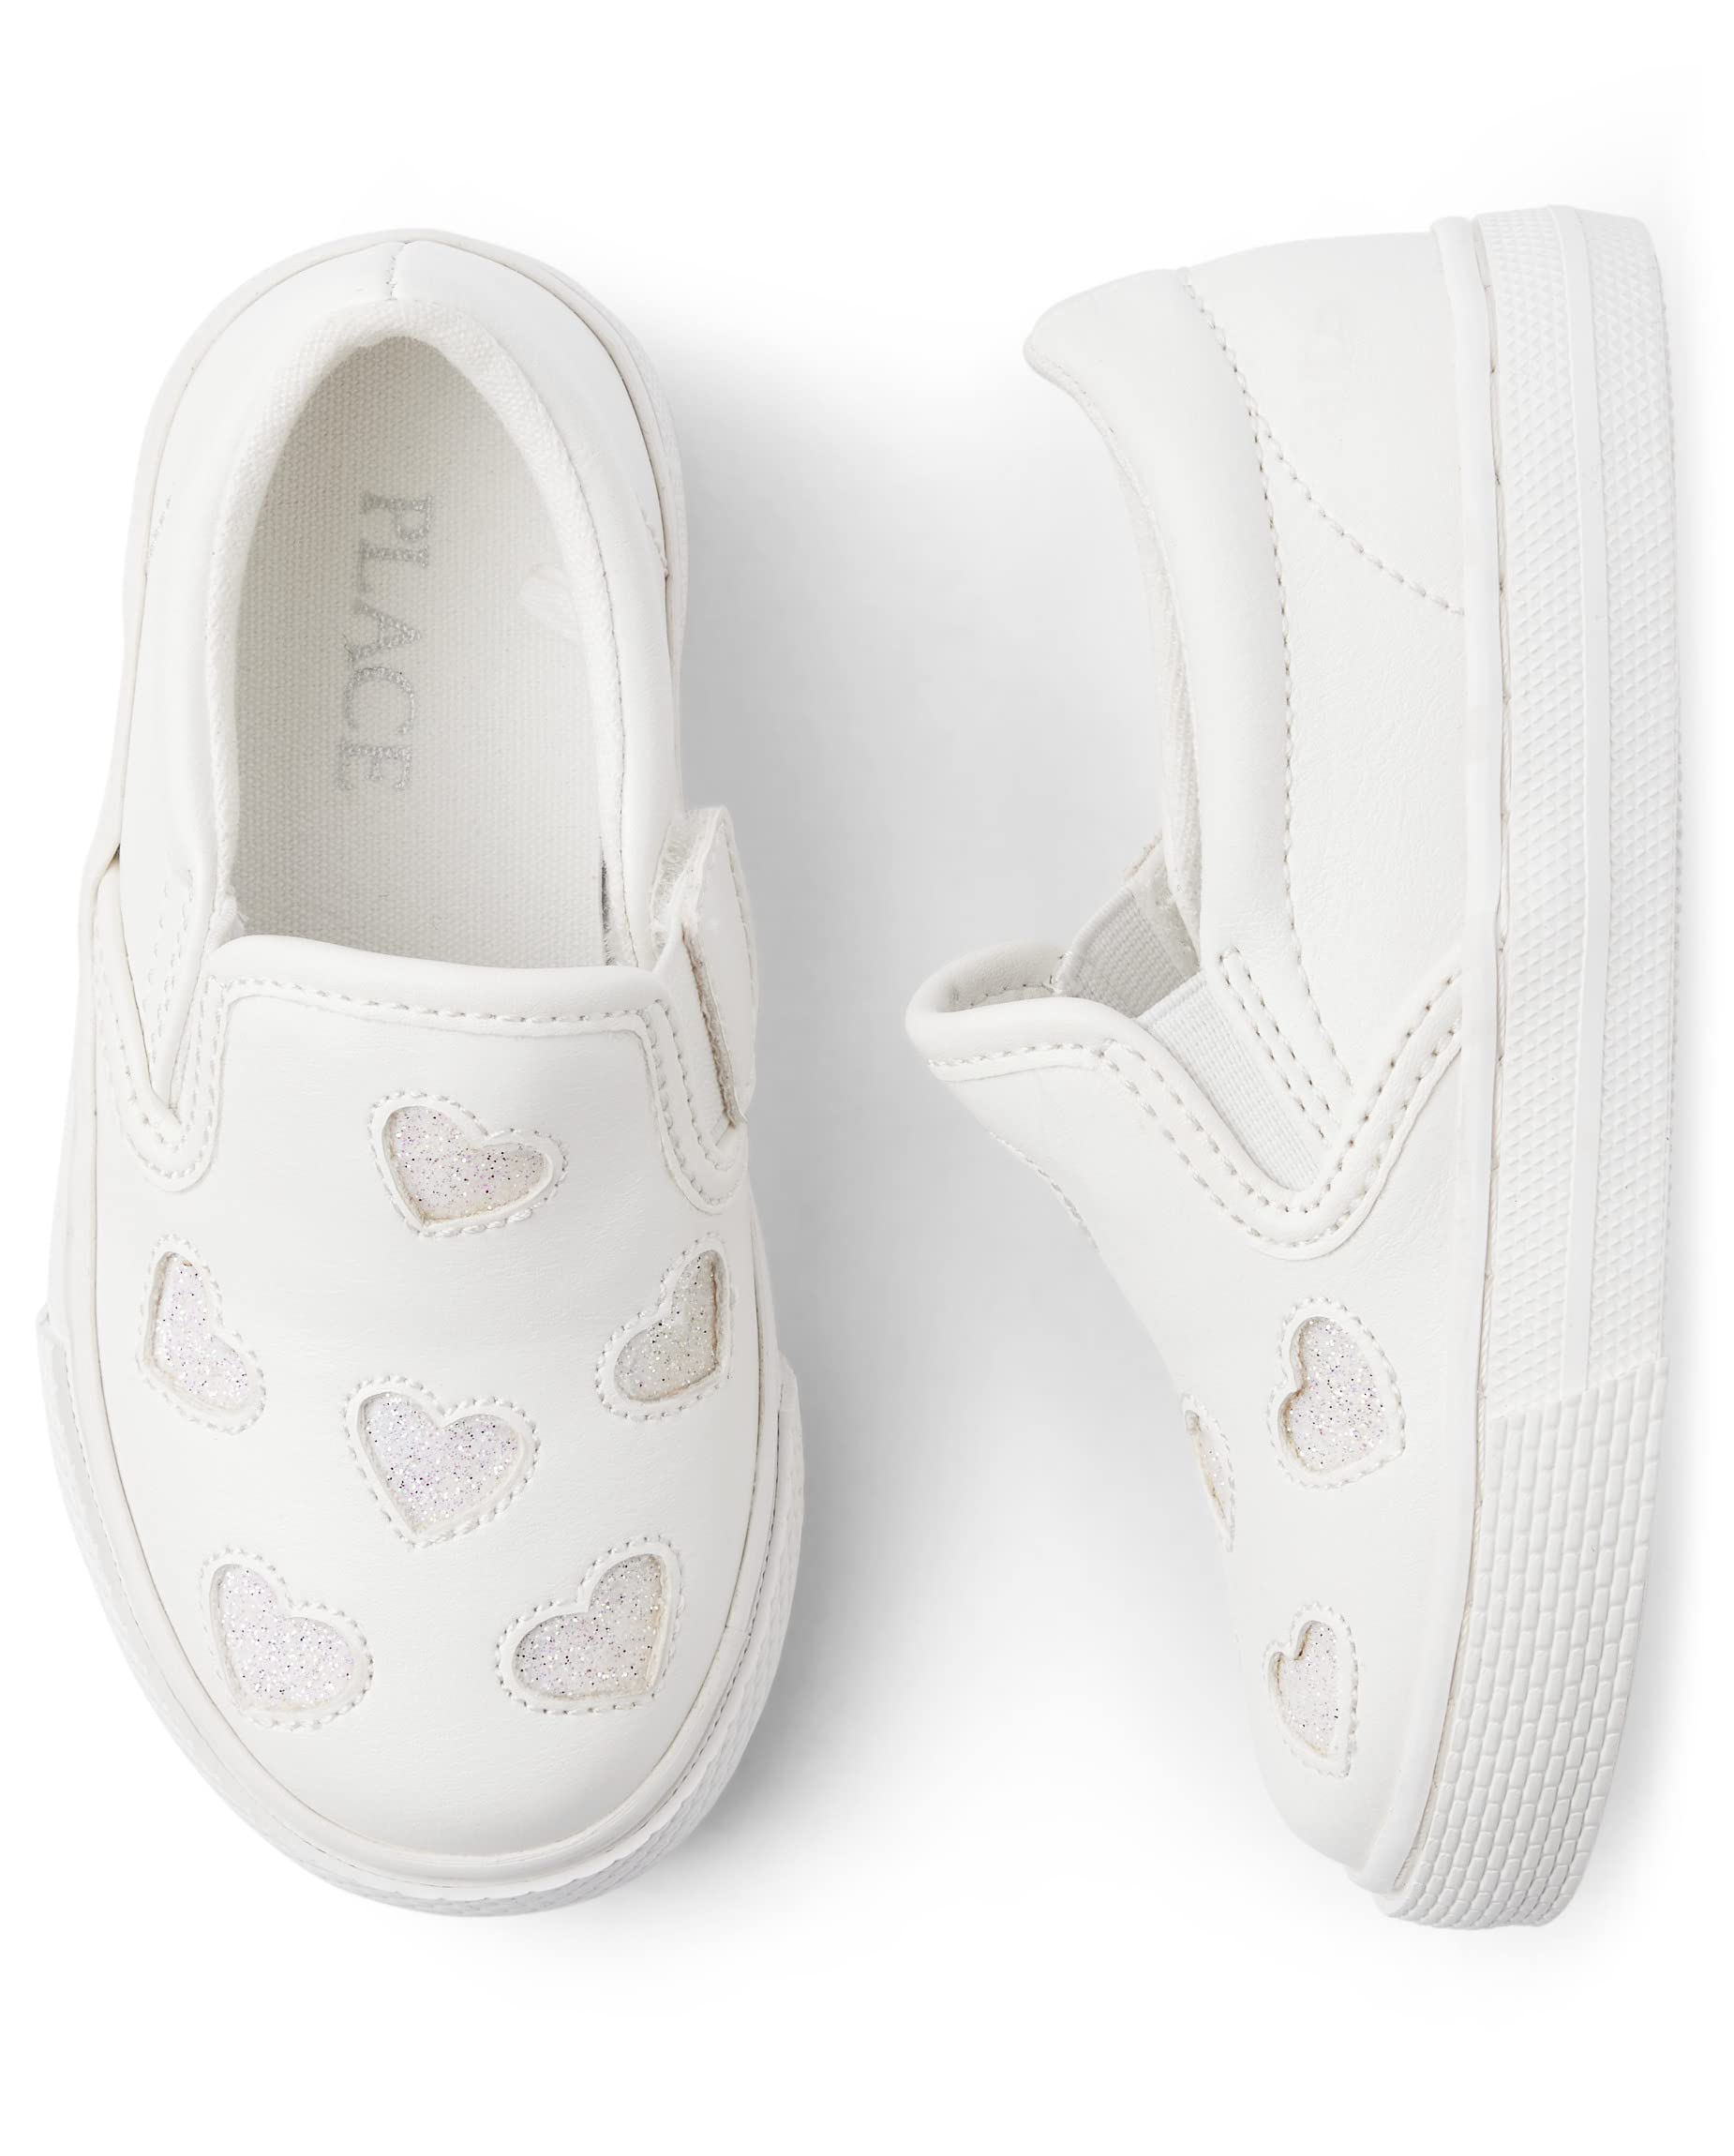 The Children's Place Unisex-Child and Toddler Girls Slip on Shoes Sneaker